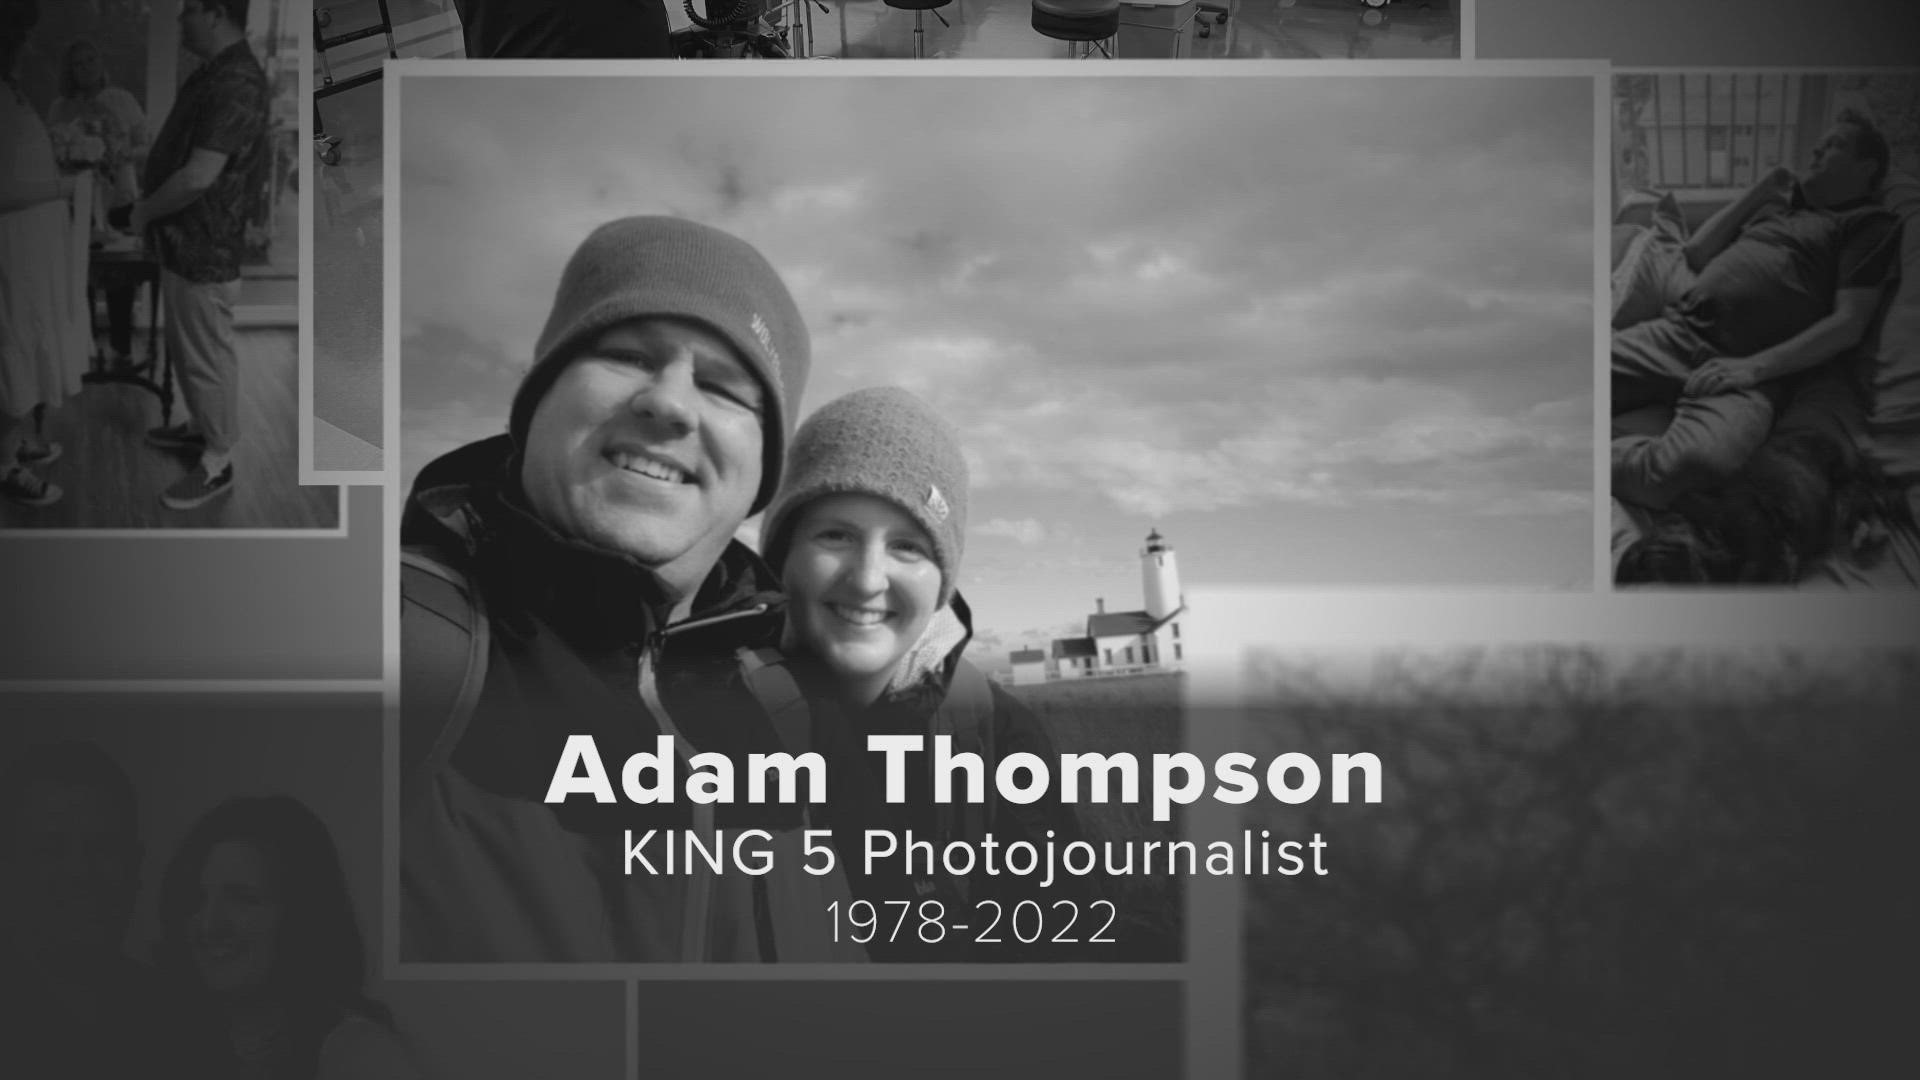 KING 5 Photojournalist Adam Thompson has died just a month after he was diagnosed with brain cancer.